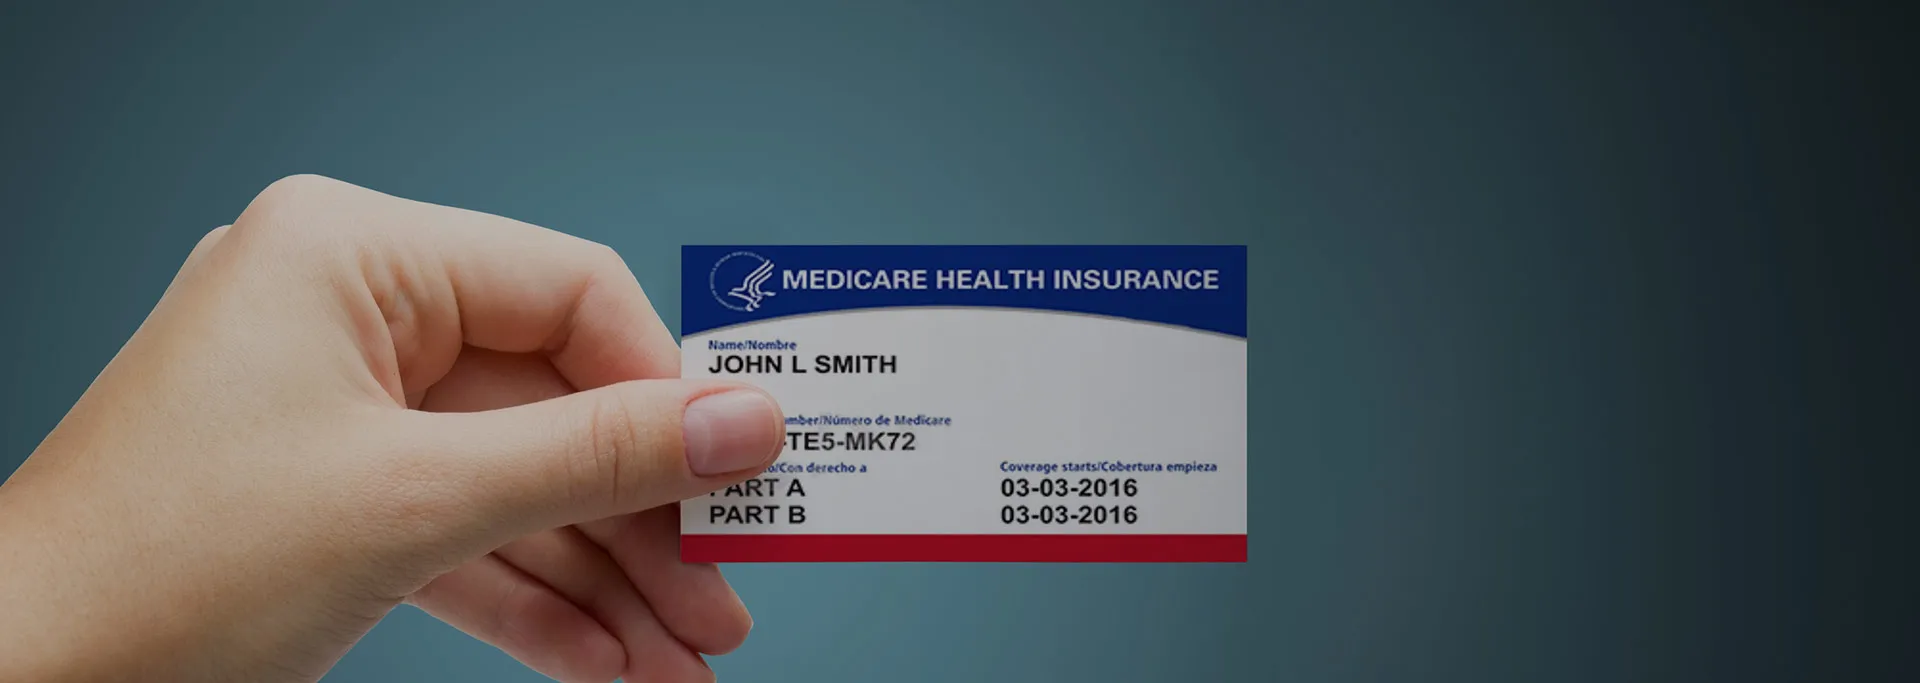 New Medicare Card’s Impact on Providers & RCM